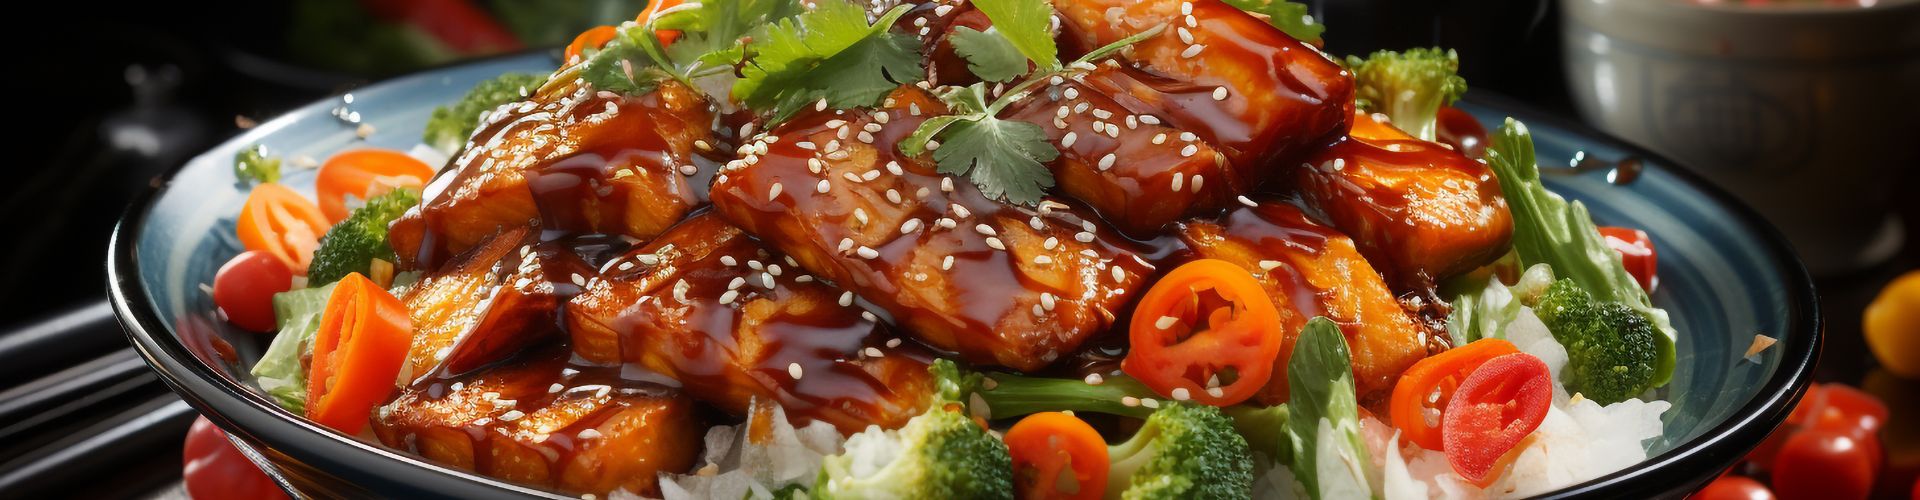 Make Mom's day with a delicious Hibachi Chicken brunch! Easy, impressive, and perfect for a Mother's Day celebration